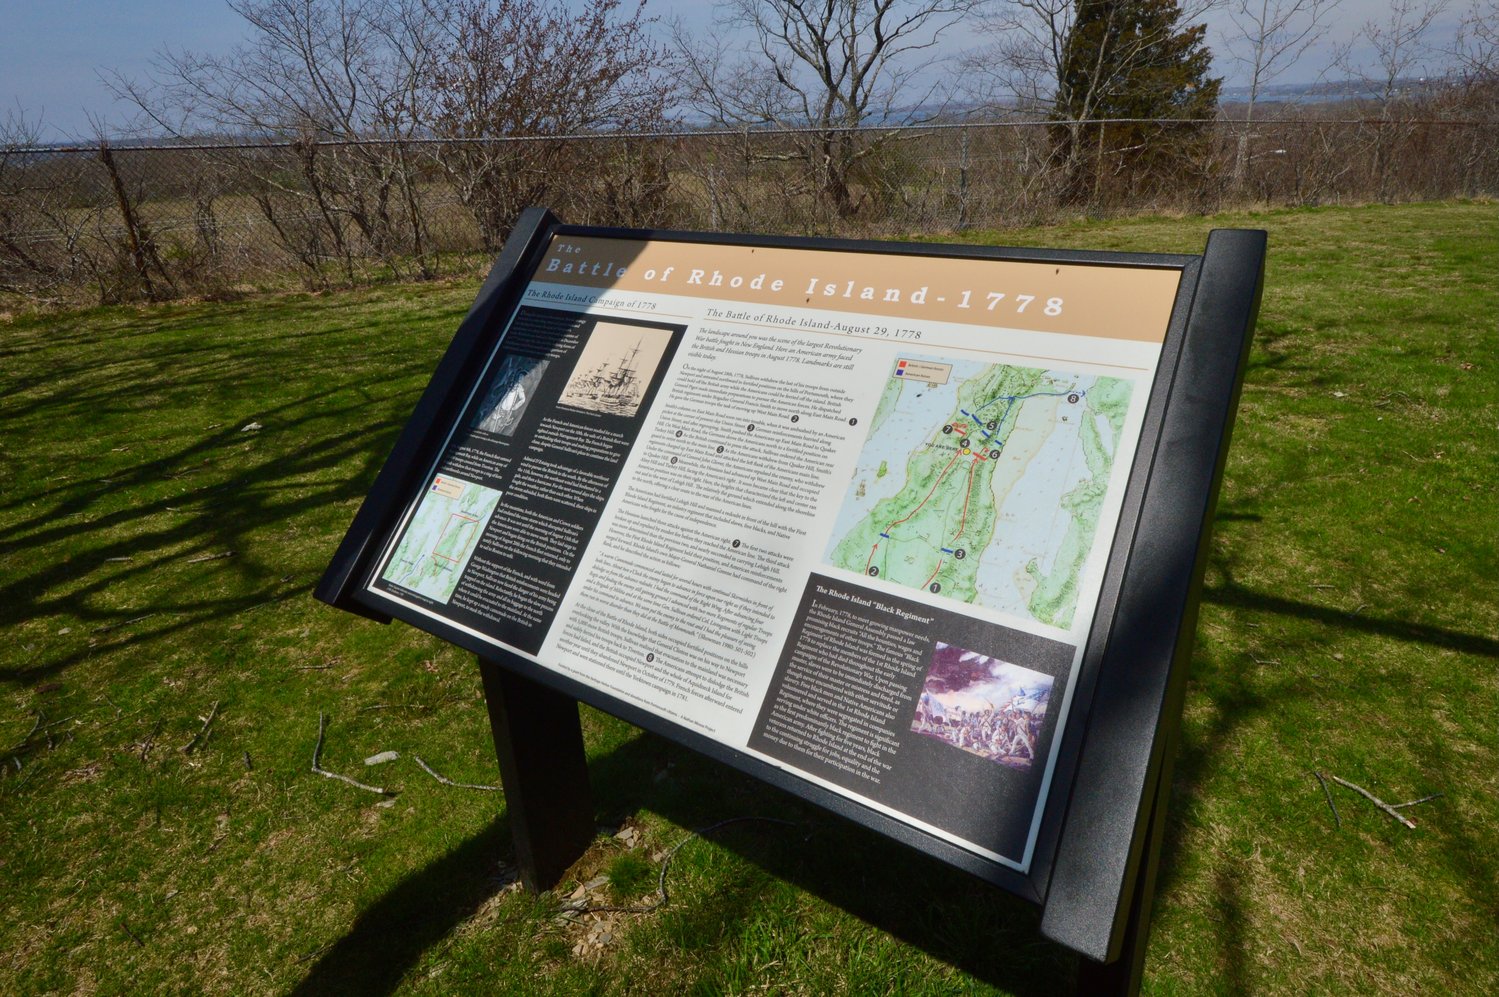 A sign at Heritage Park in Portsmouth explains the site’s connection to the Battle of Rhode Island of 1778.